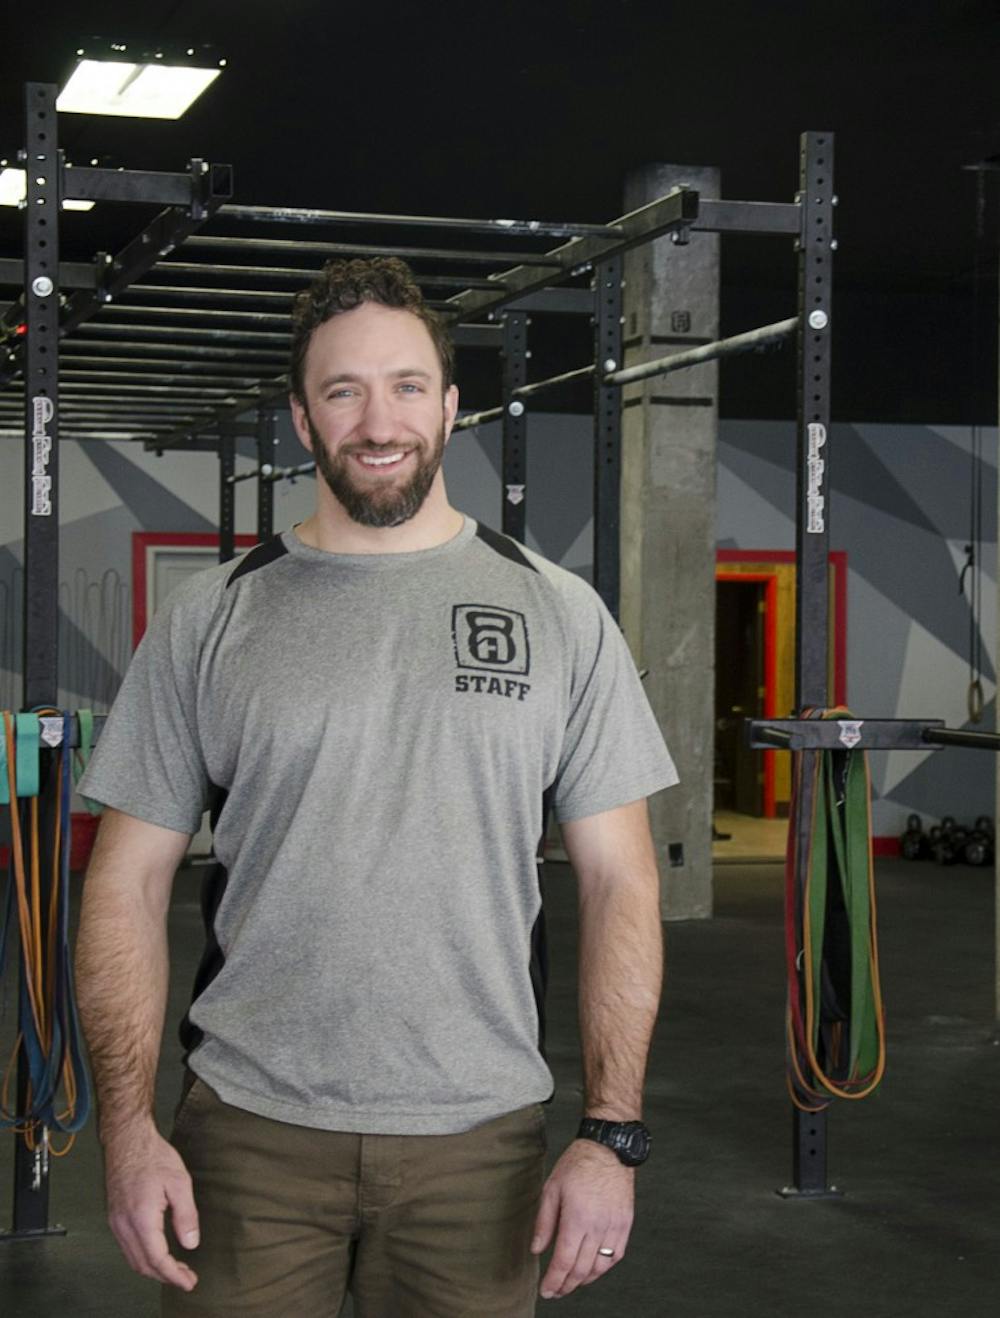 BJ McKay is the owner of The Arsenal in downtown Muncie. McKay prides his business on seven principles in the gym to promote a community feeling; loyalty, duty, respect/honor, selflessness, humility, integrity and positive action. DN PHOTO BREANNA DAUGHERTY